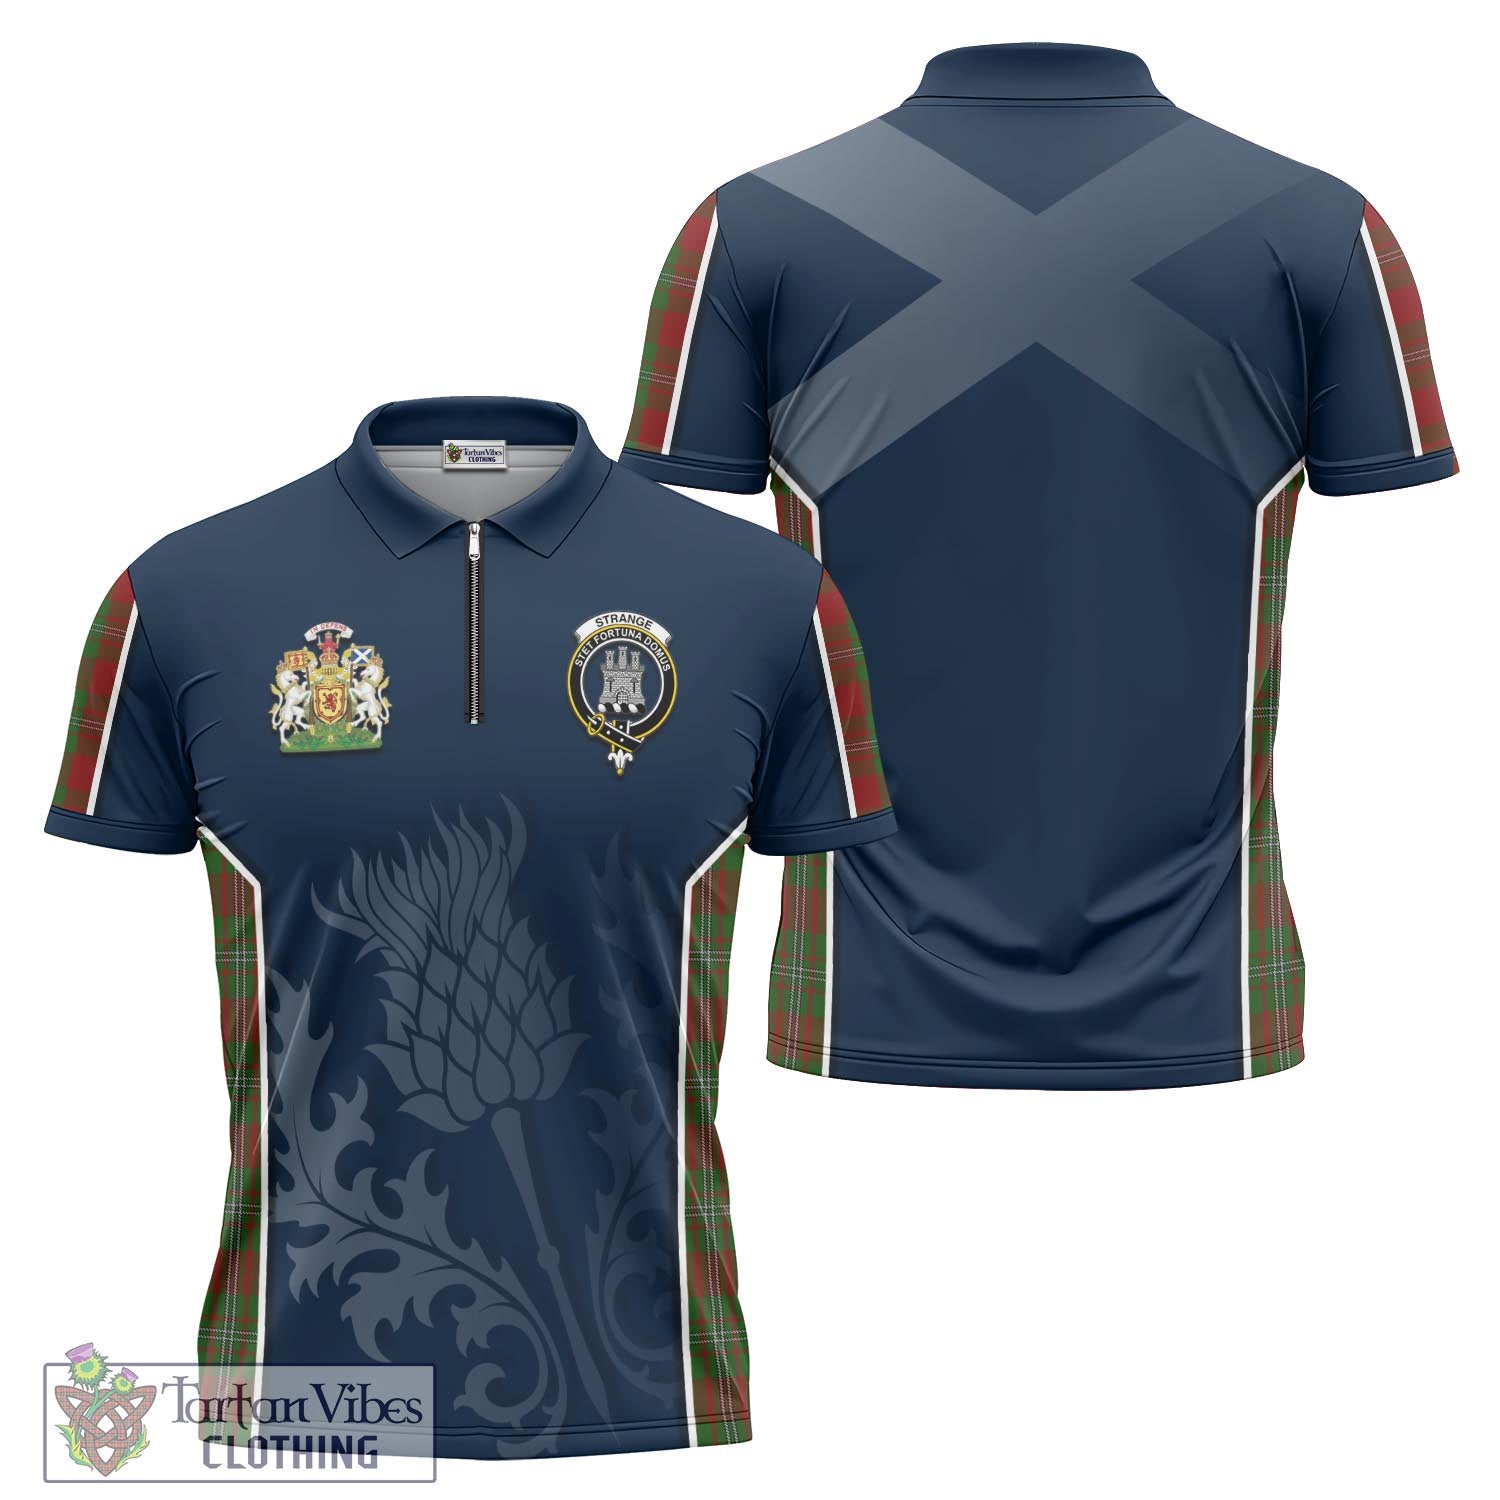 Tartan Vibes Clothing Strange Tartan Zipper Polo Shirt with Family Crest and Scottish Thistle Vibes Sport Style